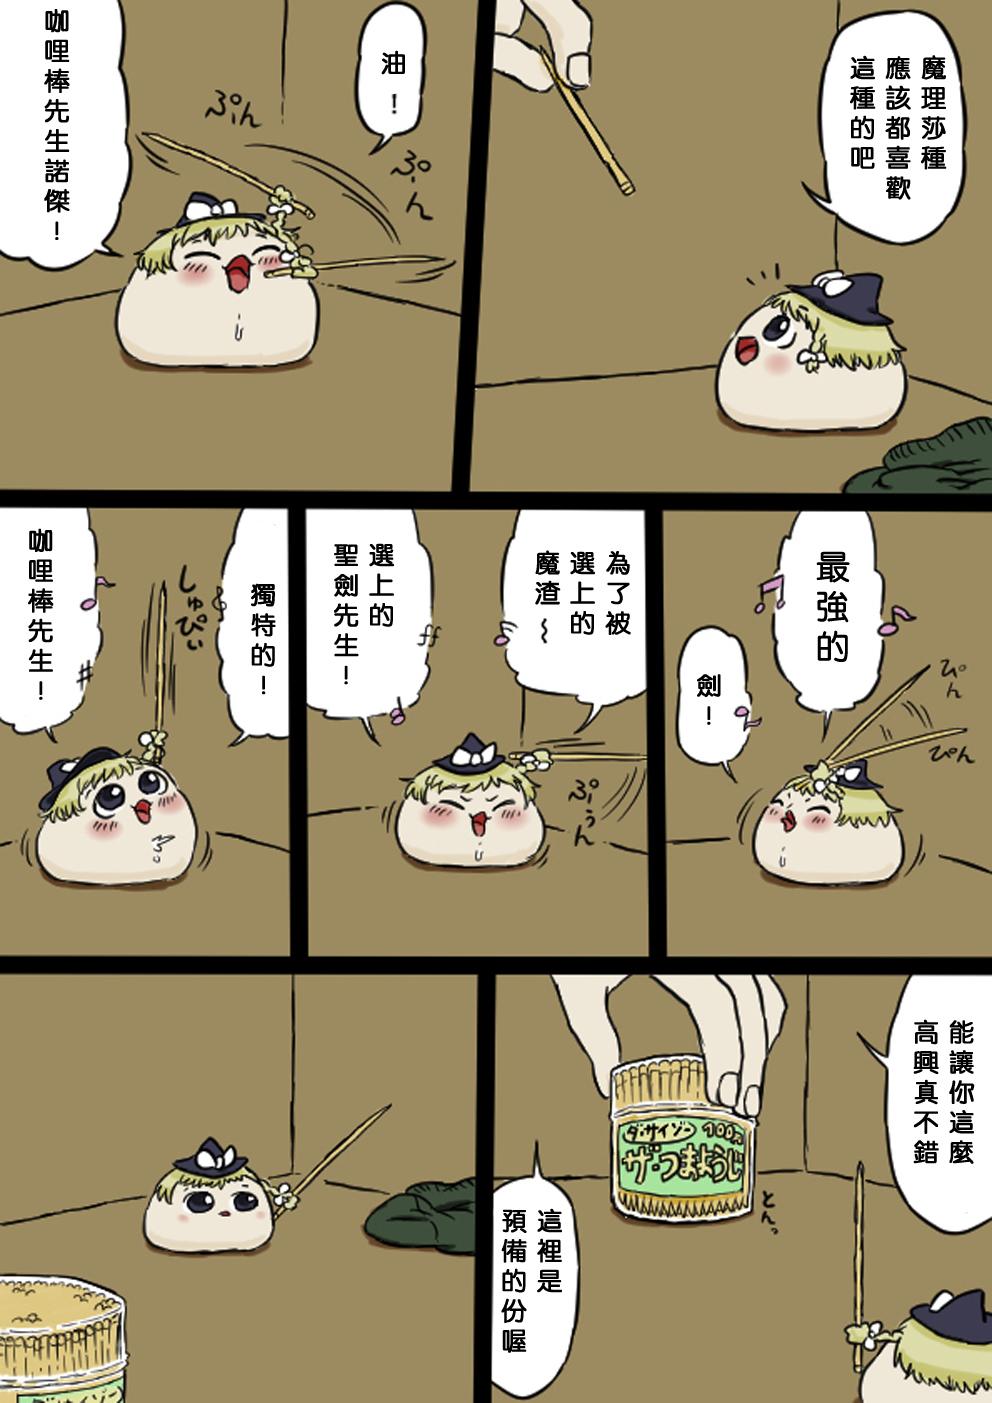 Safadinha すべてをてにいれたまりちゃ（Chinese） - Touhou project Ghetto - Page 6